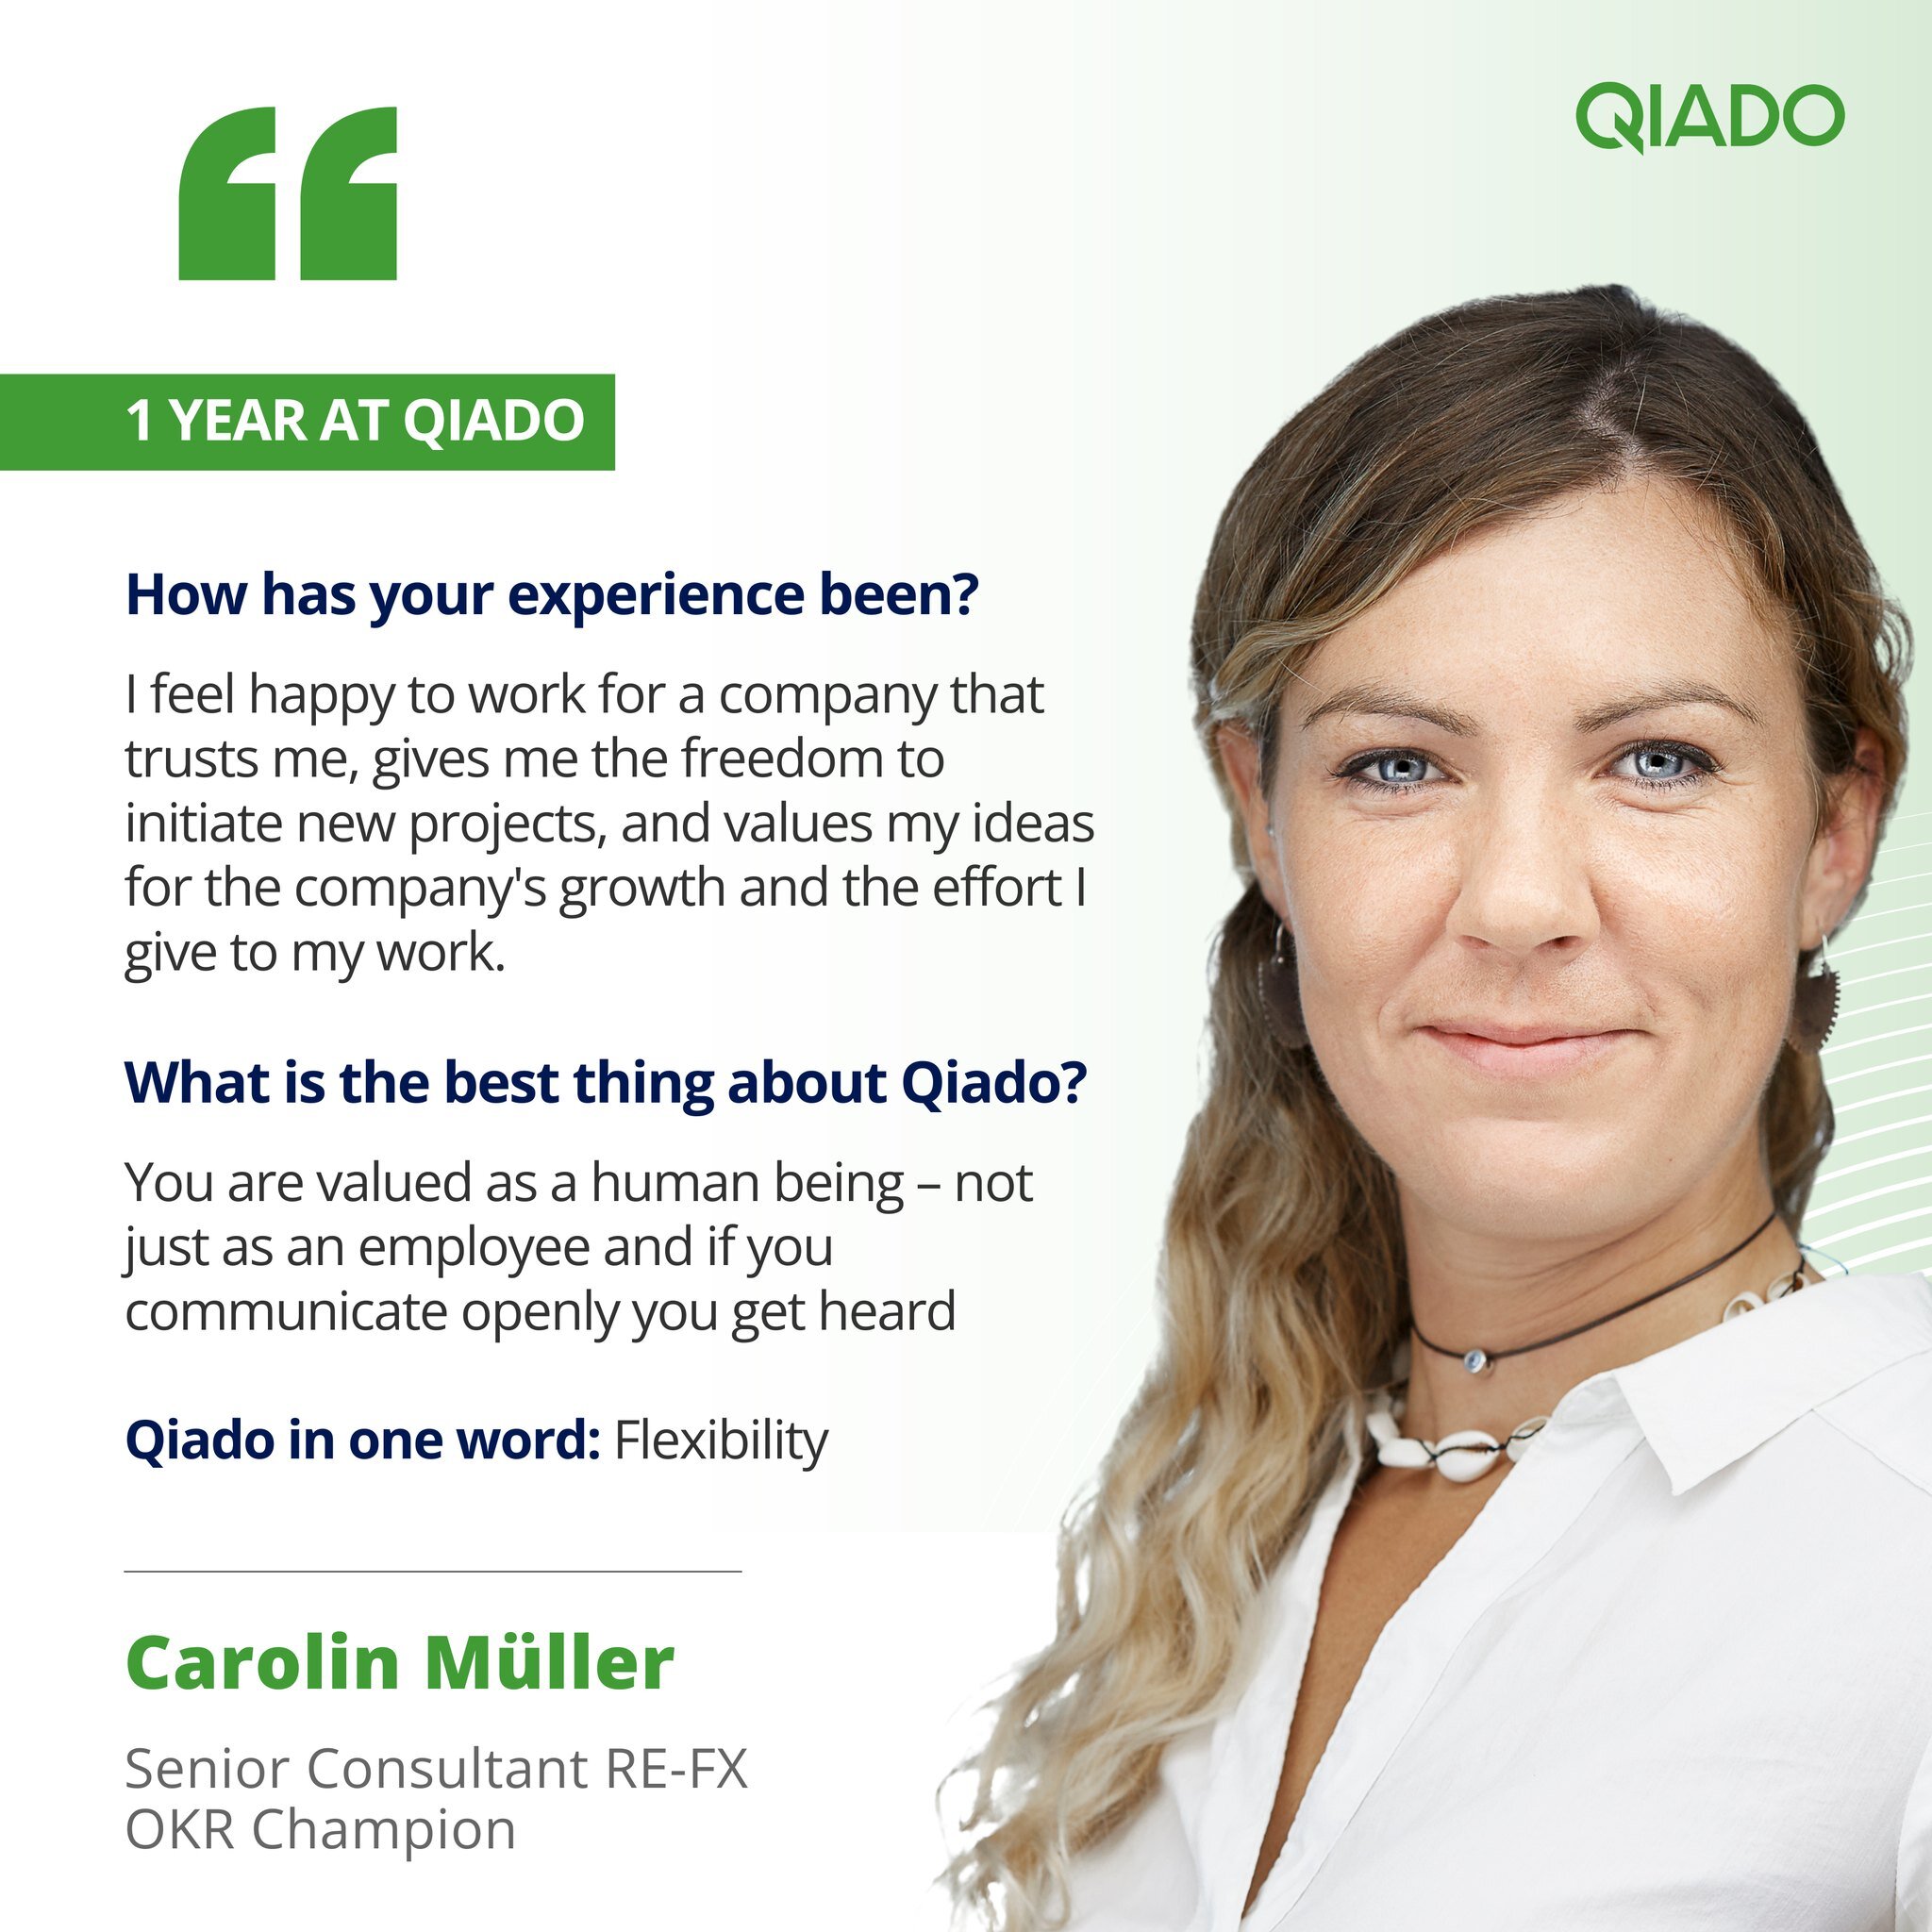 🎉 Carolin M&uuml;ller just turned one year at Qiado and we couldn&acute;t be more happy and proud to have such a dedicated, talented and amazing human in our team! We hope you celebrate many more years to come 🚀 

#workanniversary #qiado #saprefx #